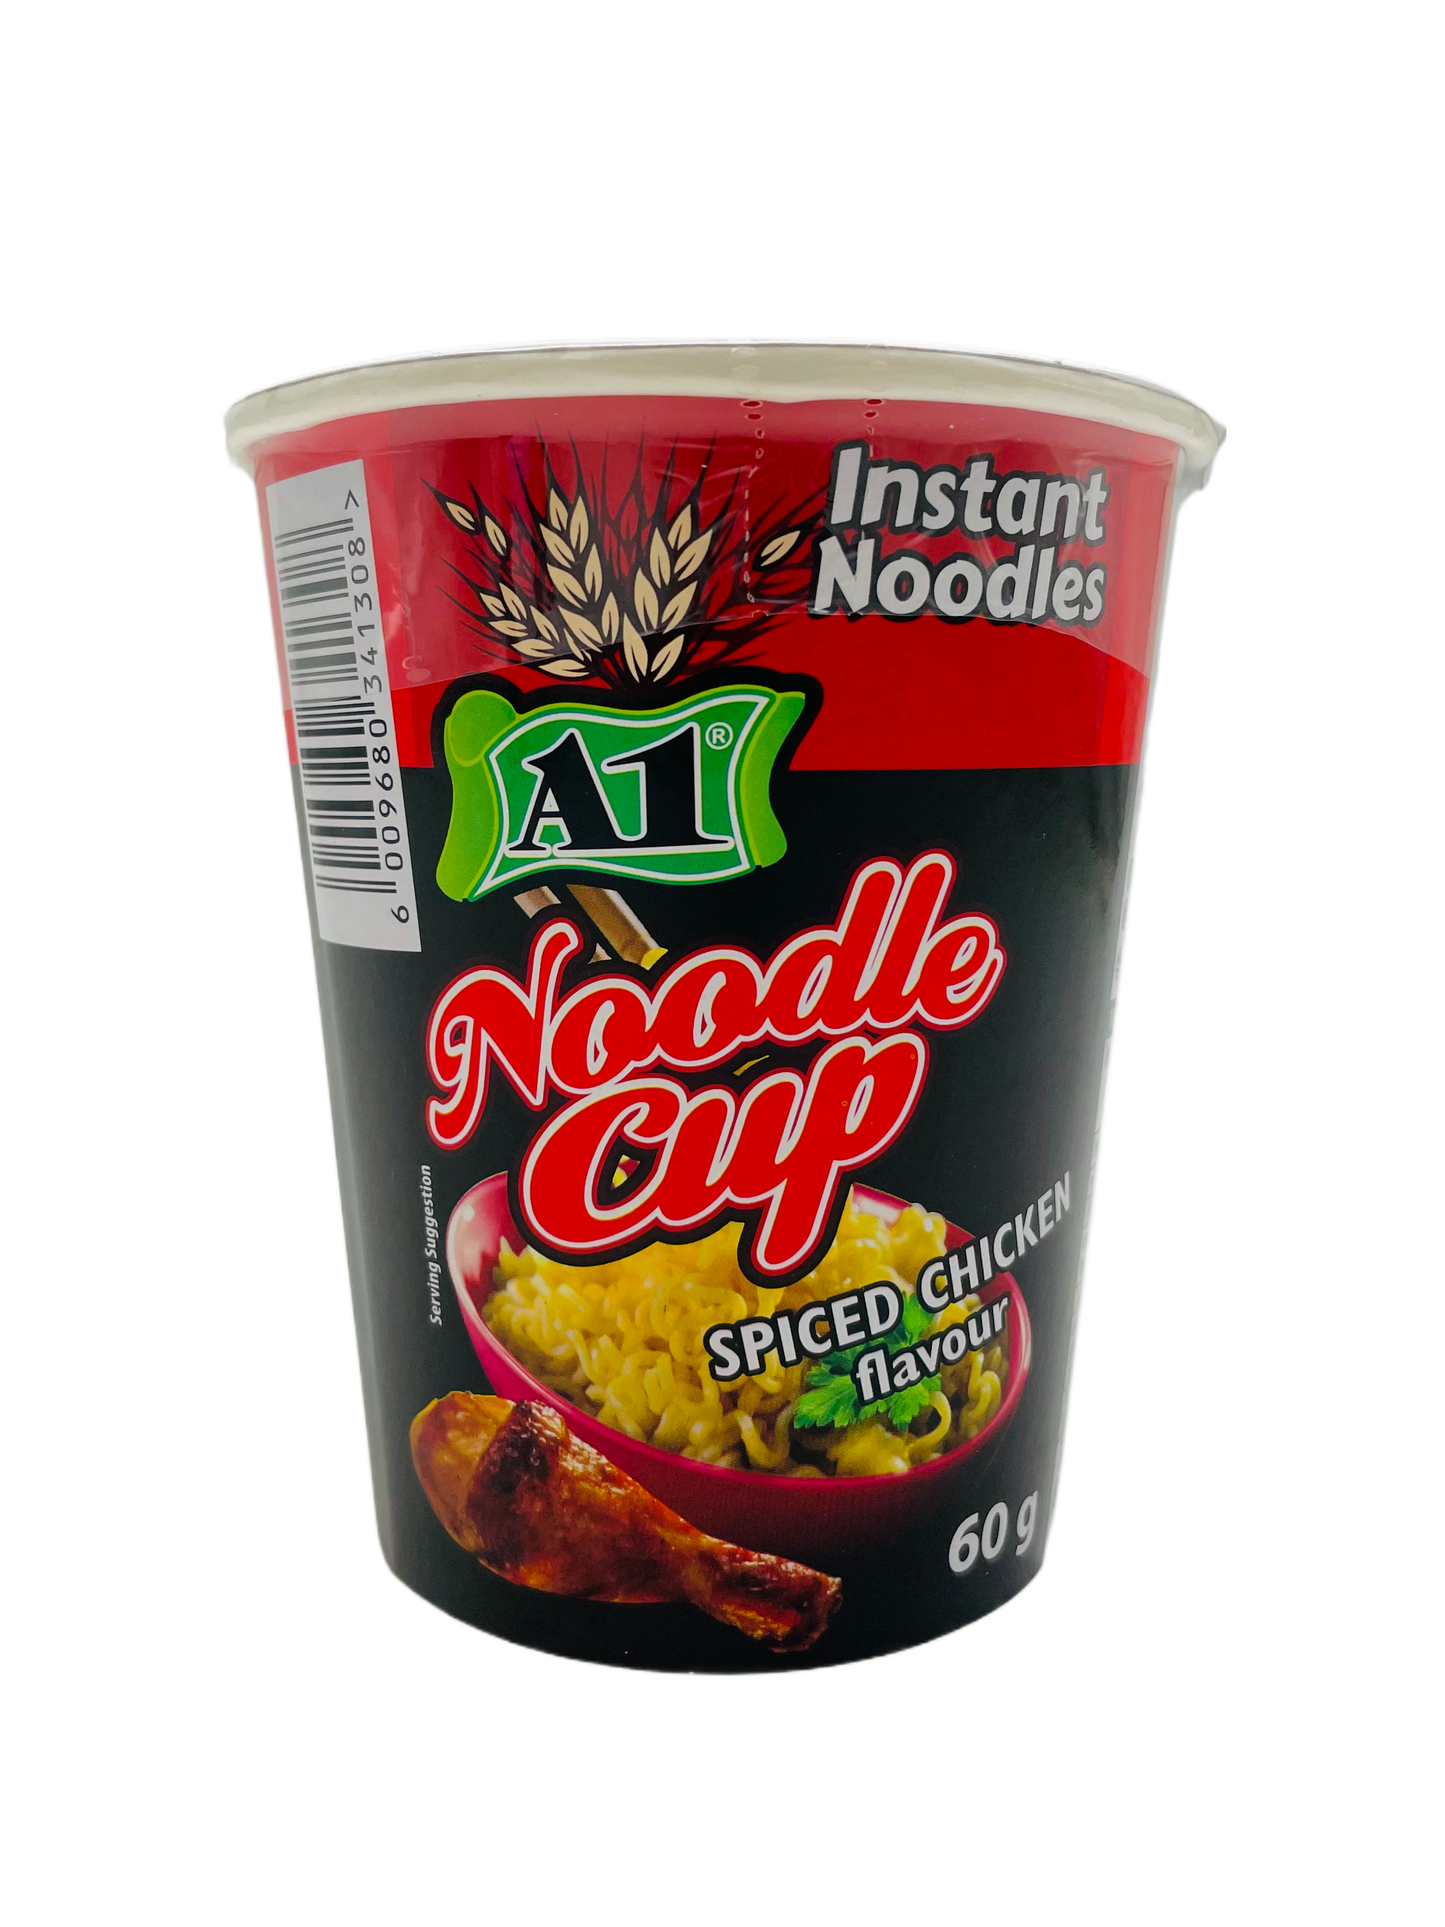 A1 Noodle Cup Spiced Chicken 60g